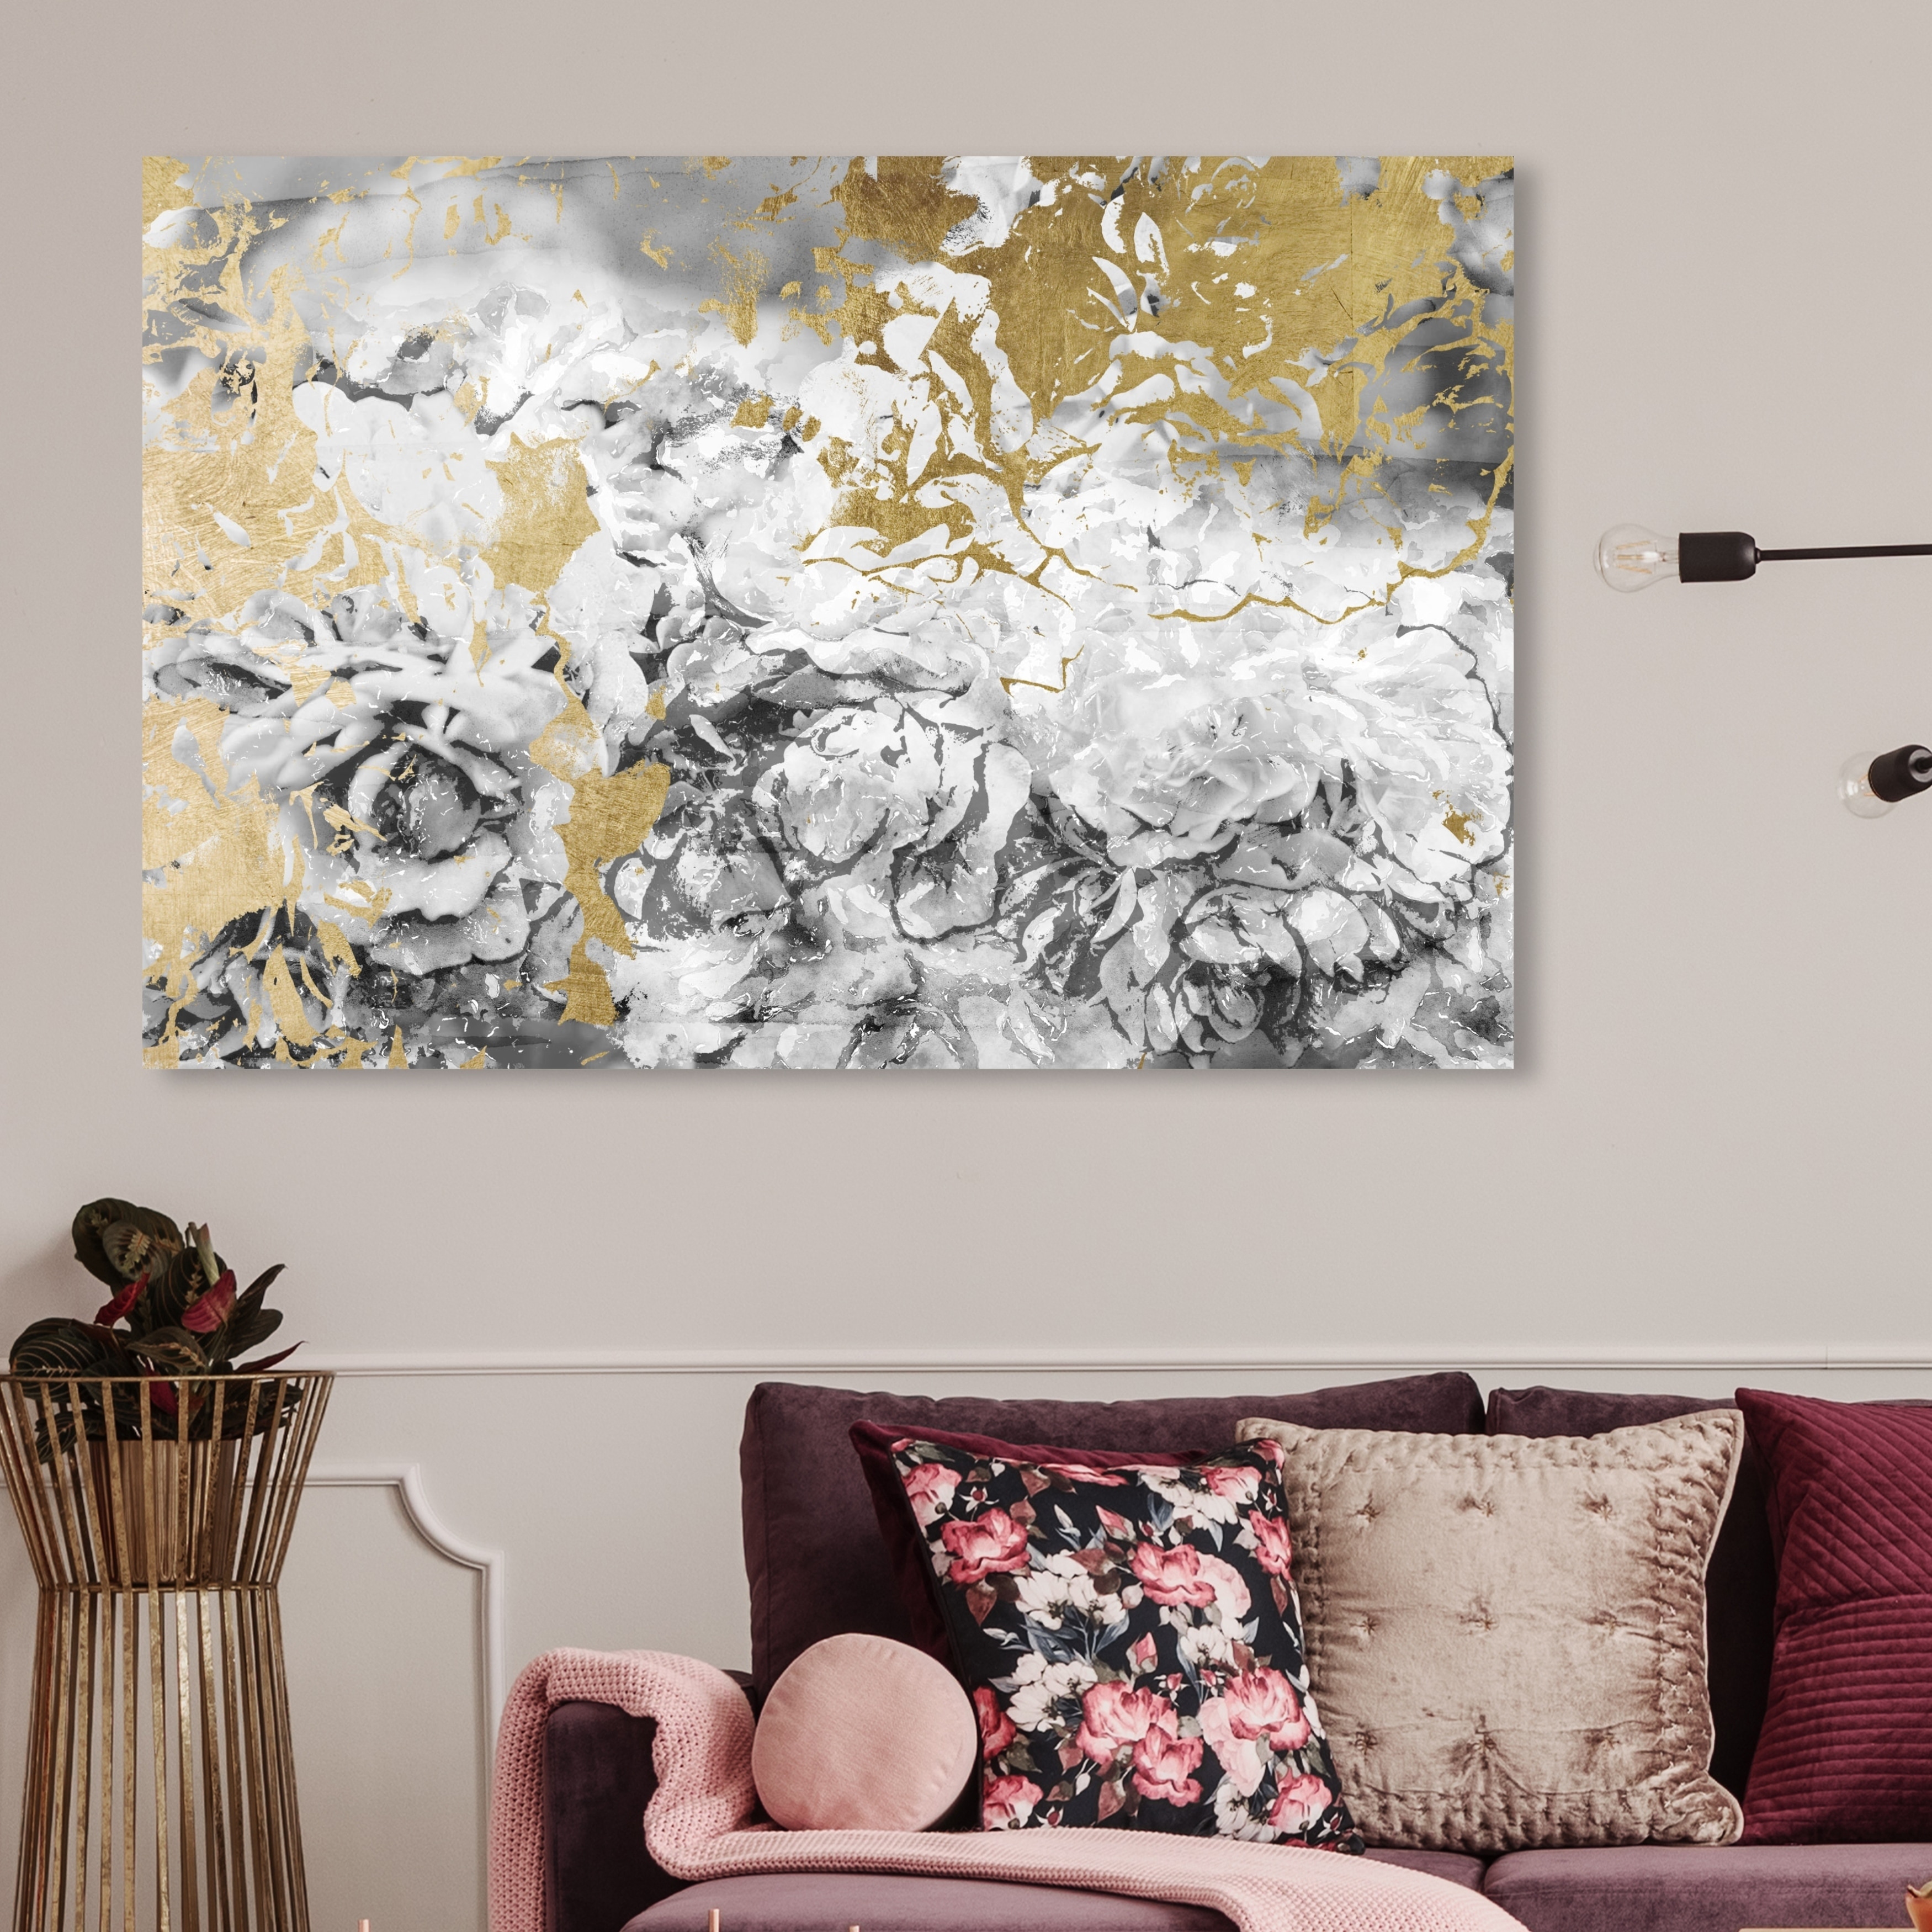 Oliver Gal 'Silver and Gold Camellias' Abstract Wall Art Canvas